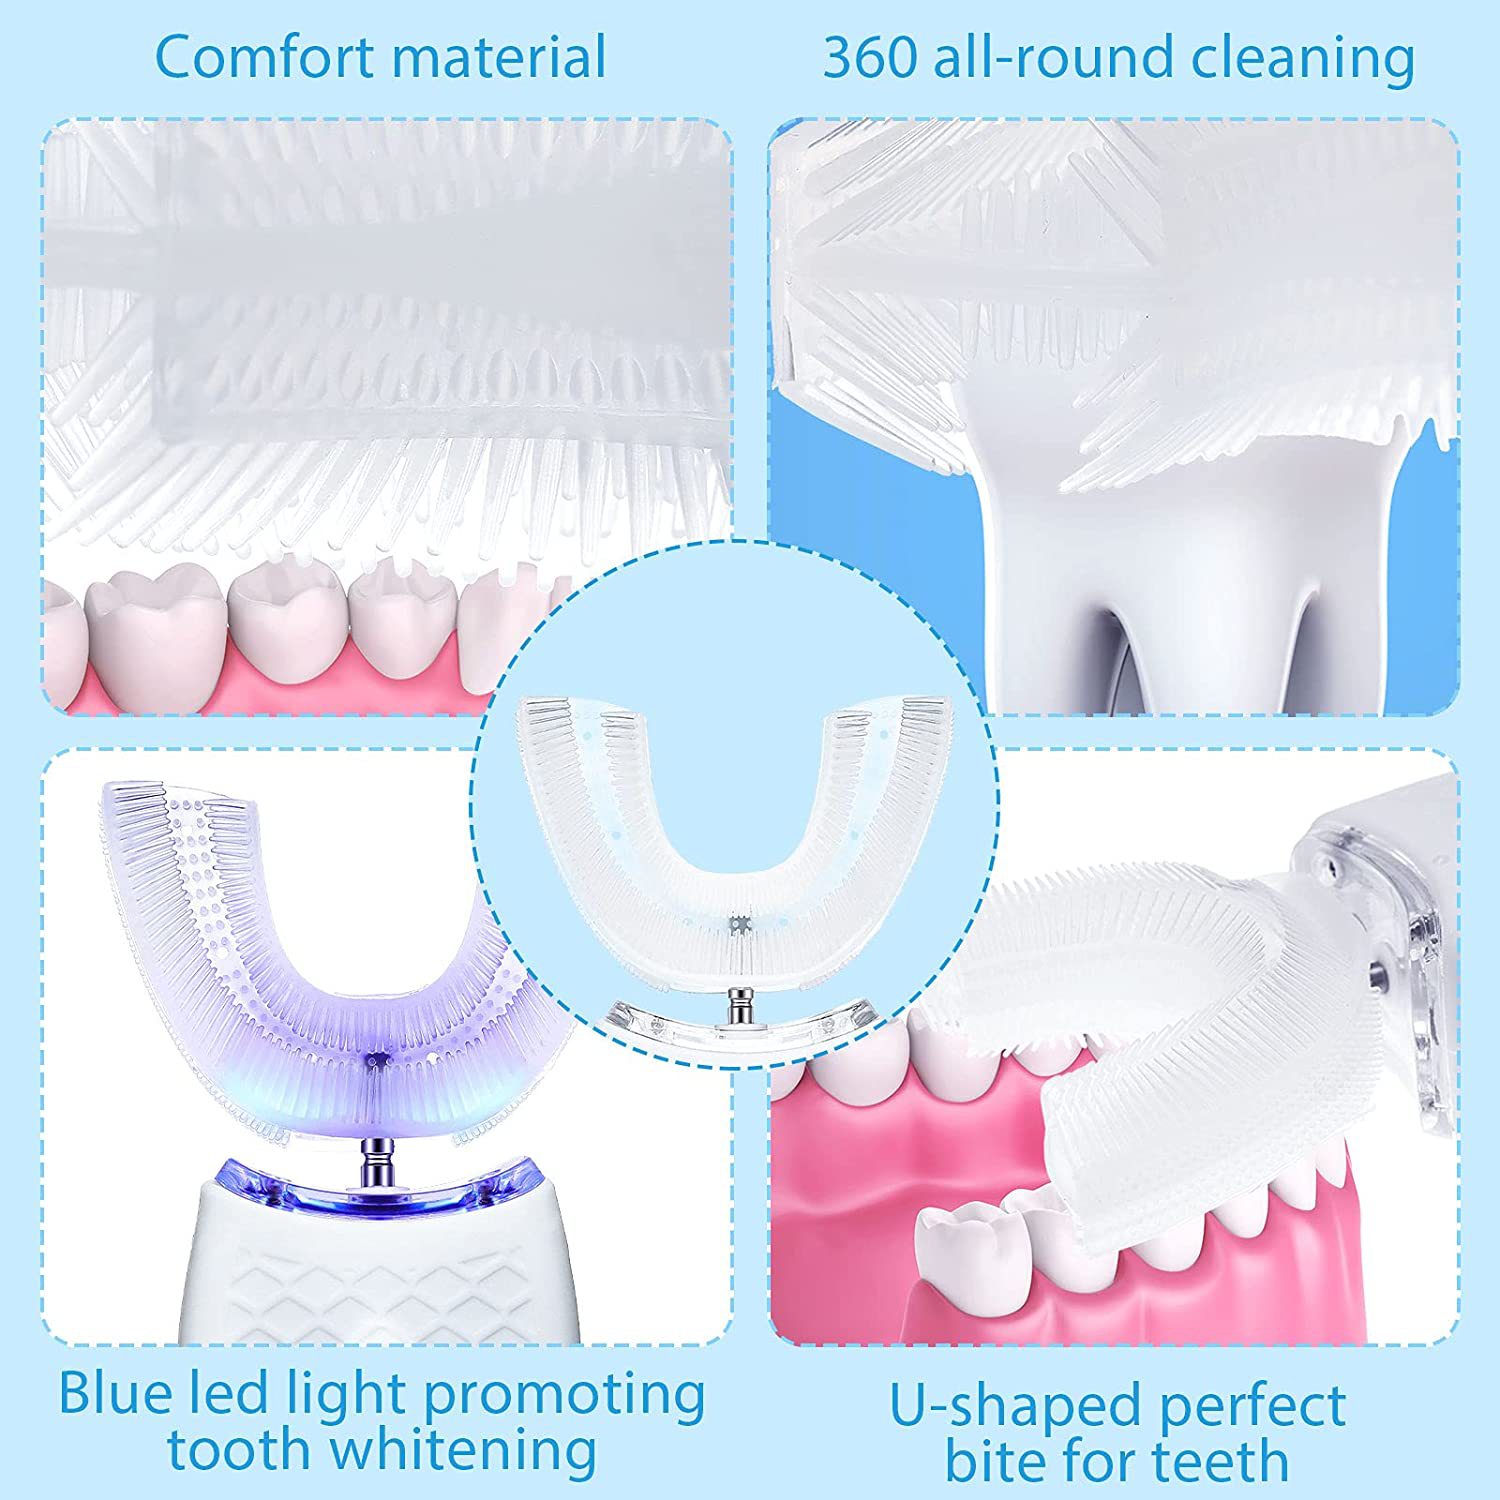 revolutionize your oral hygiene with the electric ultrasonic u shaped toothbrush 360 mouth cleansing led light waterproof ipx7 certified 3 cleansing modes whole mouth whitening details 1